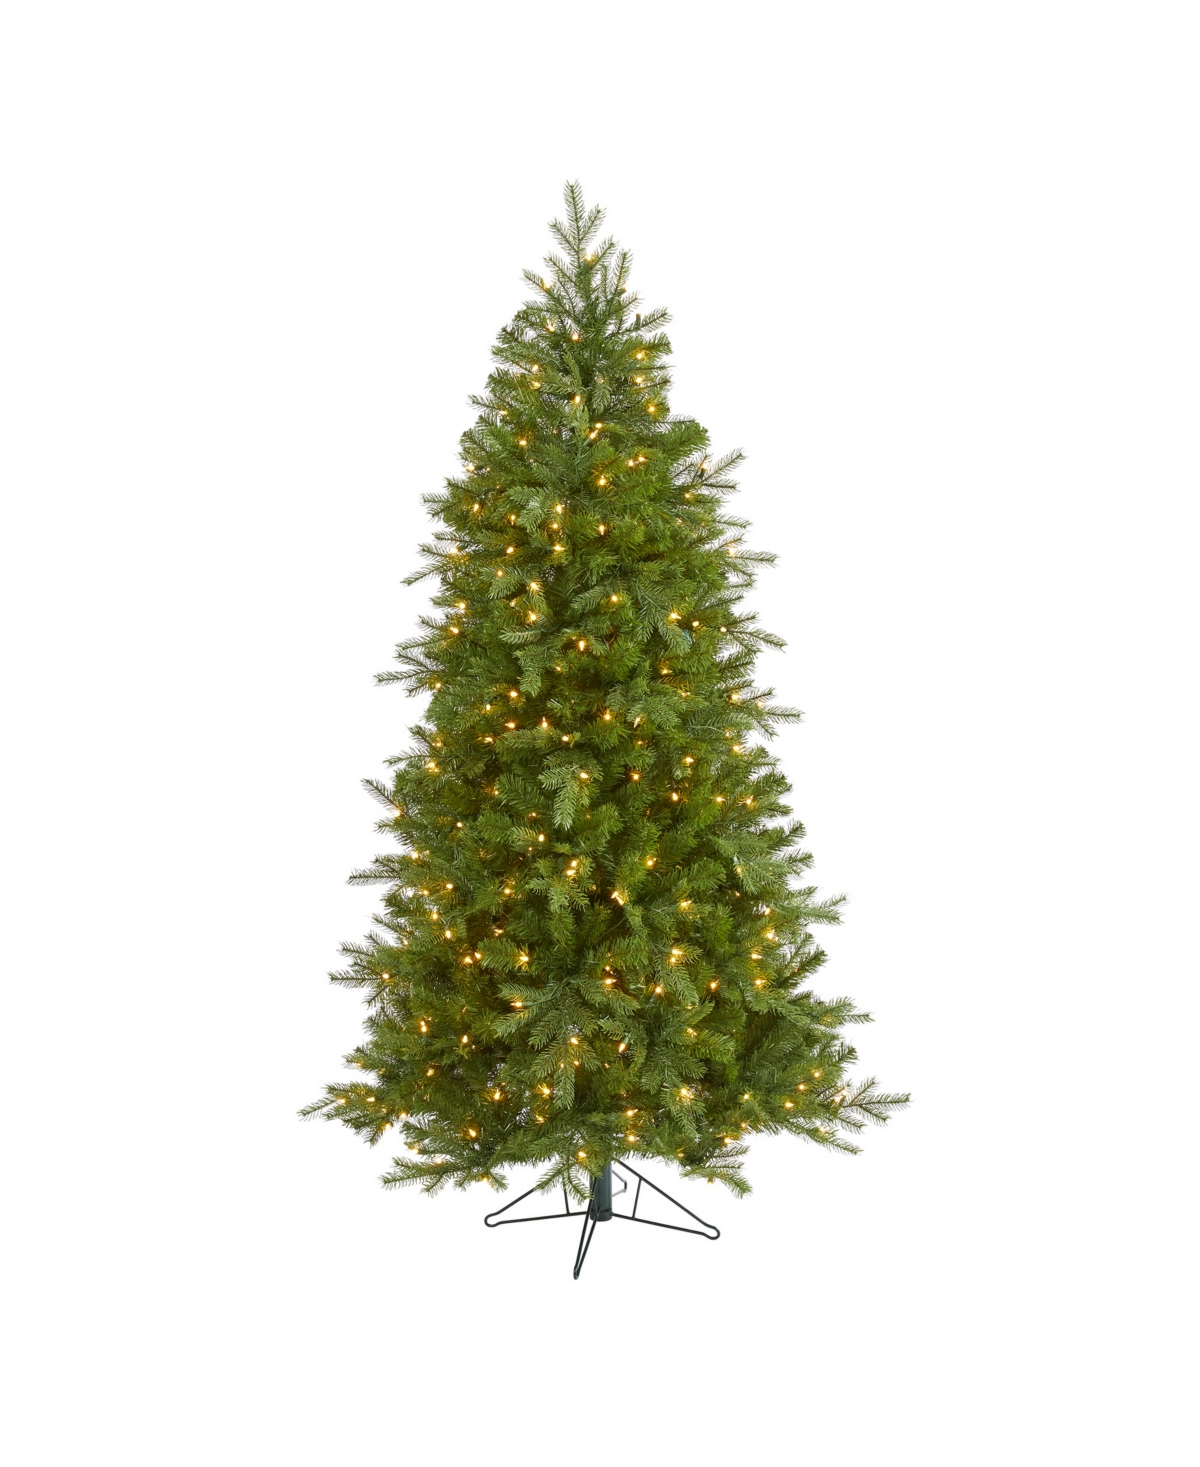 Vienna Fir Artificial Christmas Tree with Lights and Bendable Branches, 72" - Green